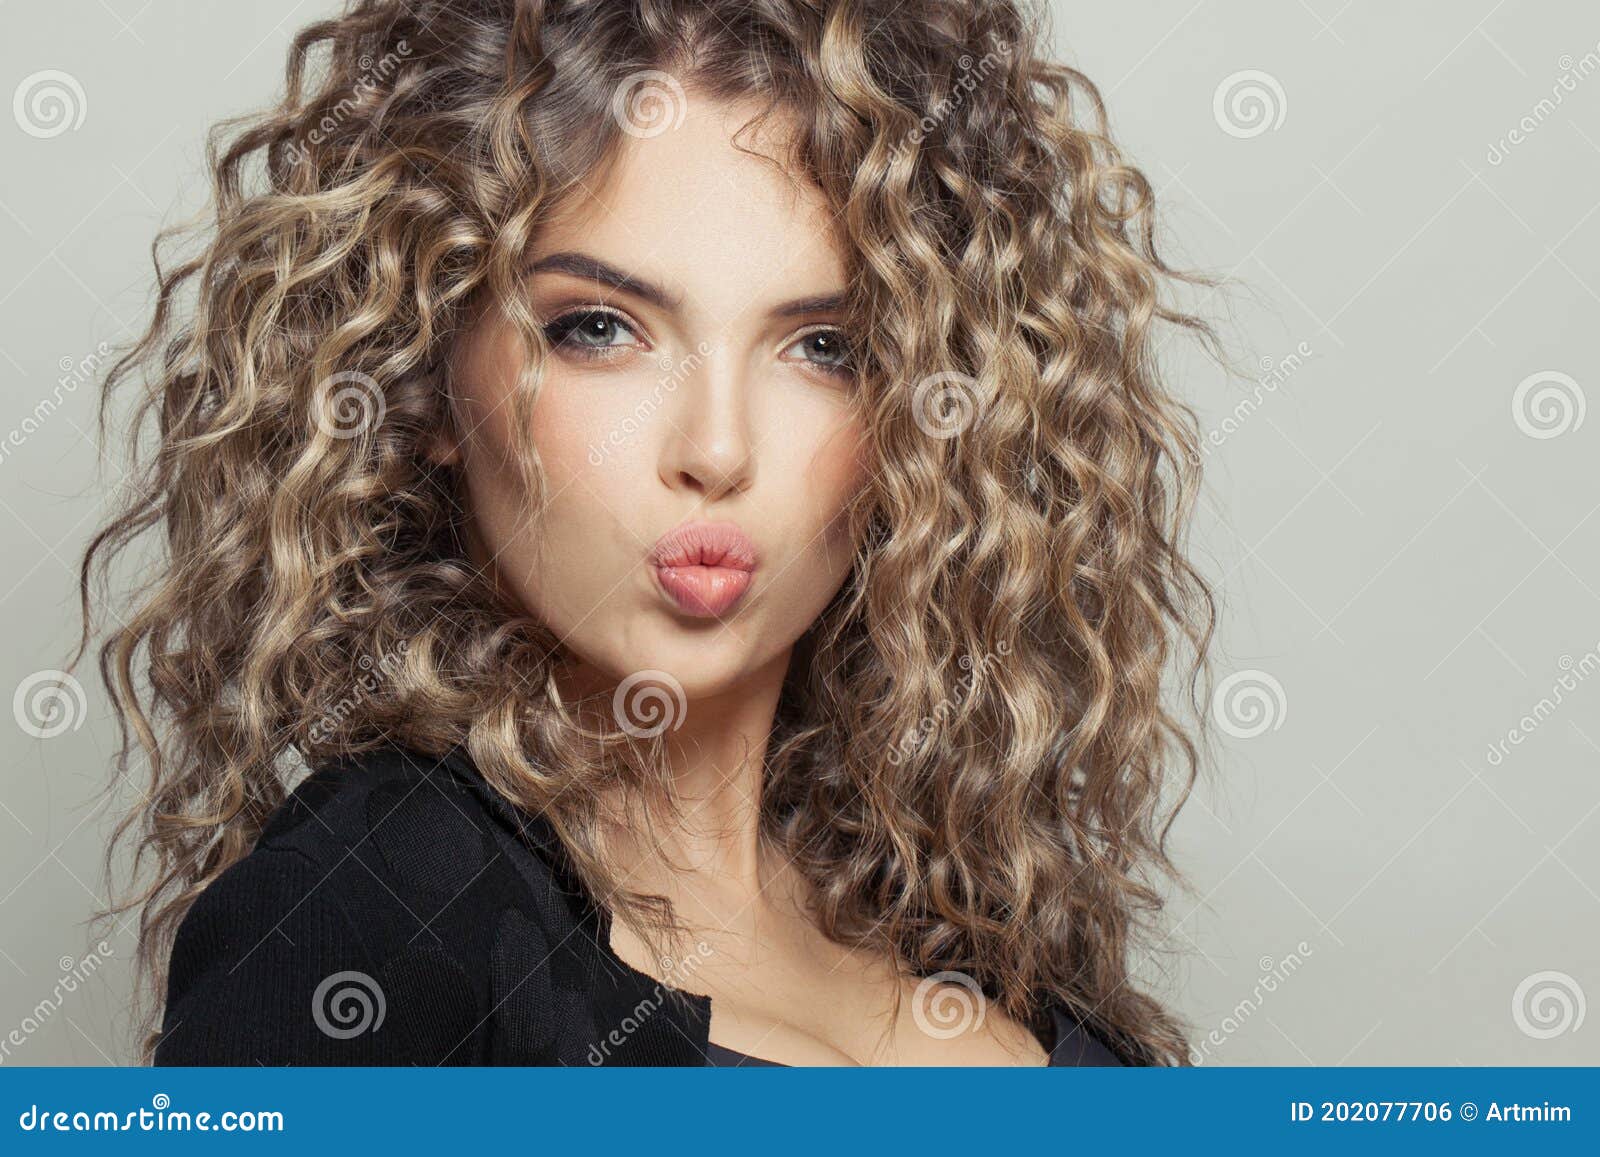 Pretty Model Woman With Healthy Curly Hair On White Background Close